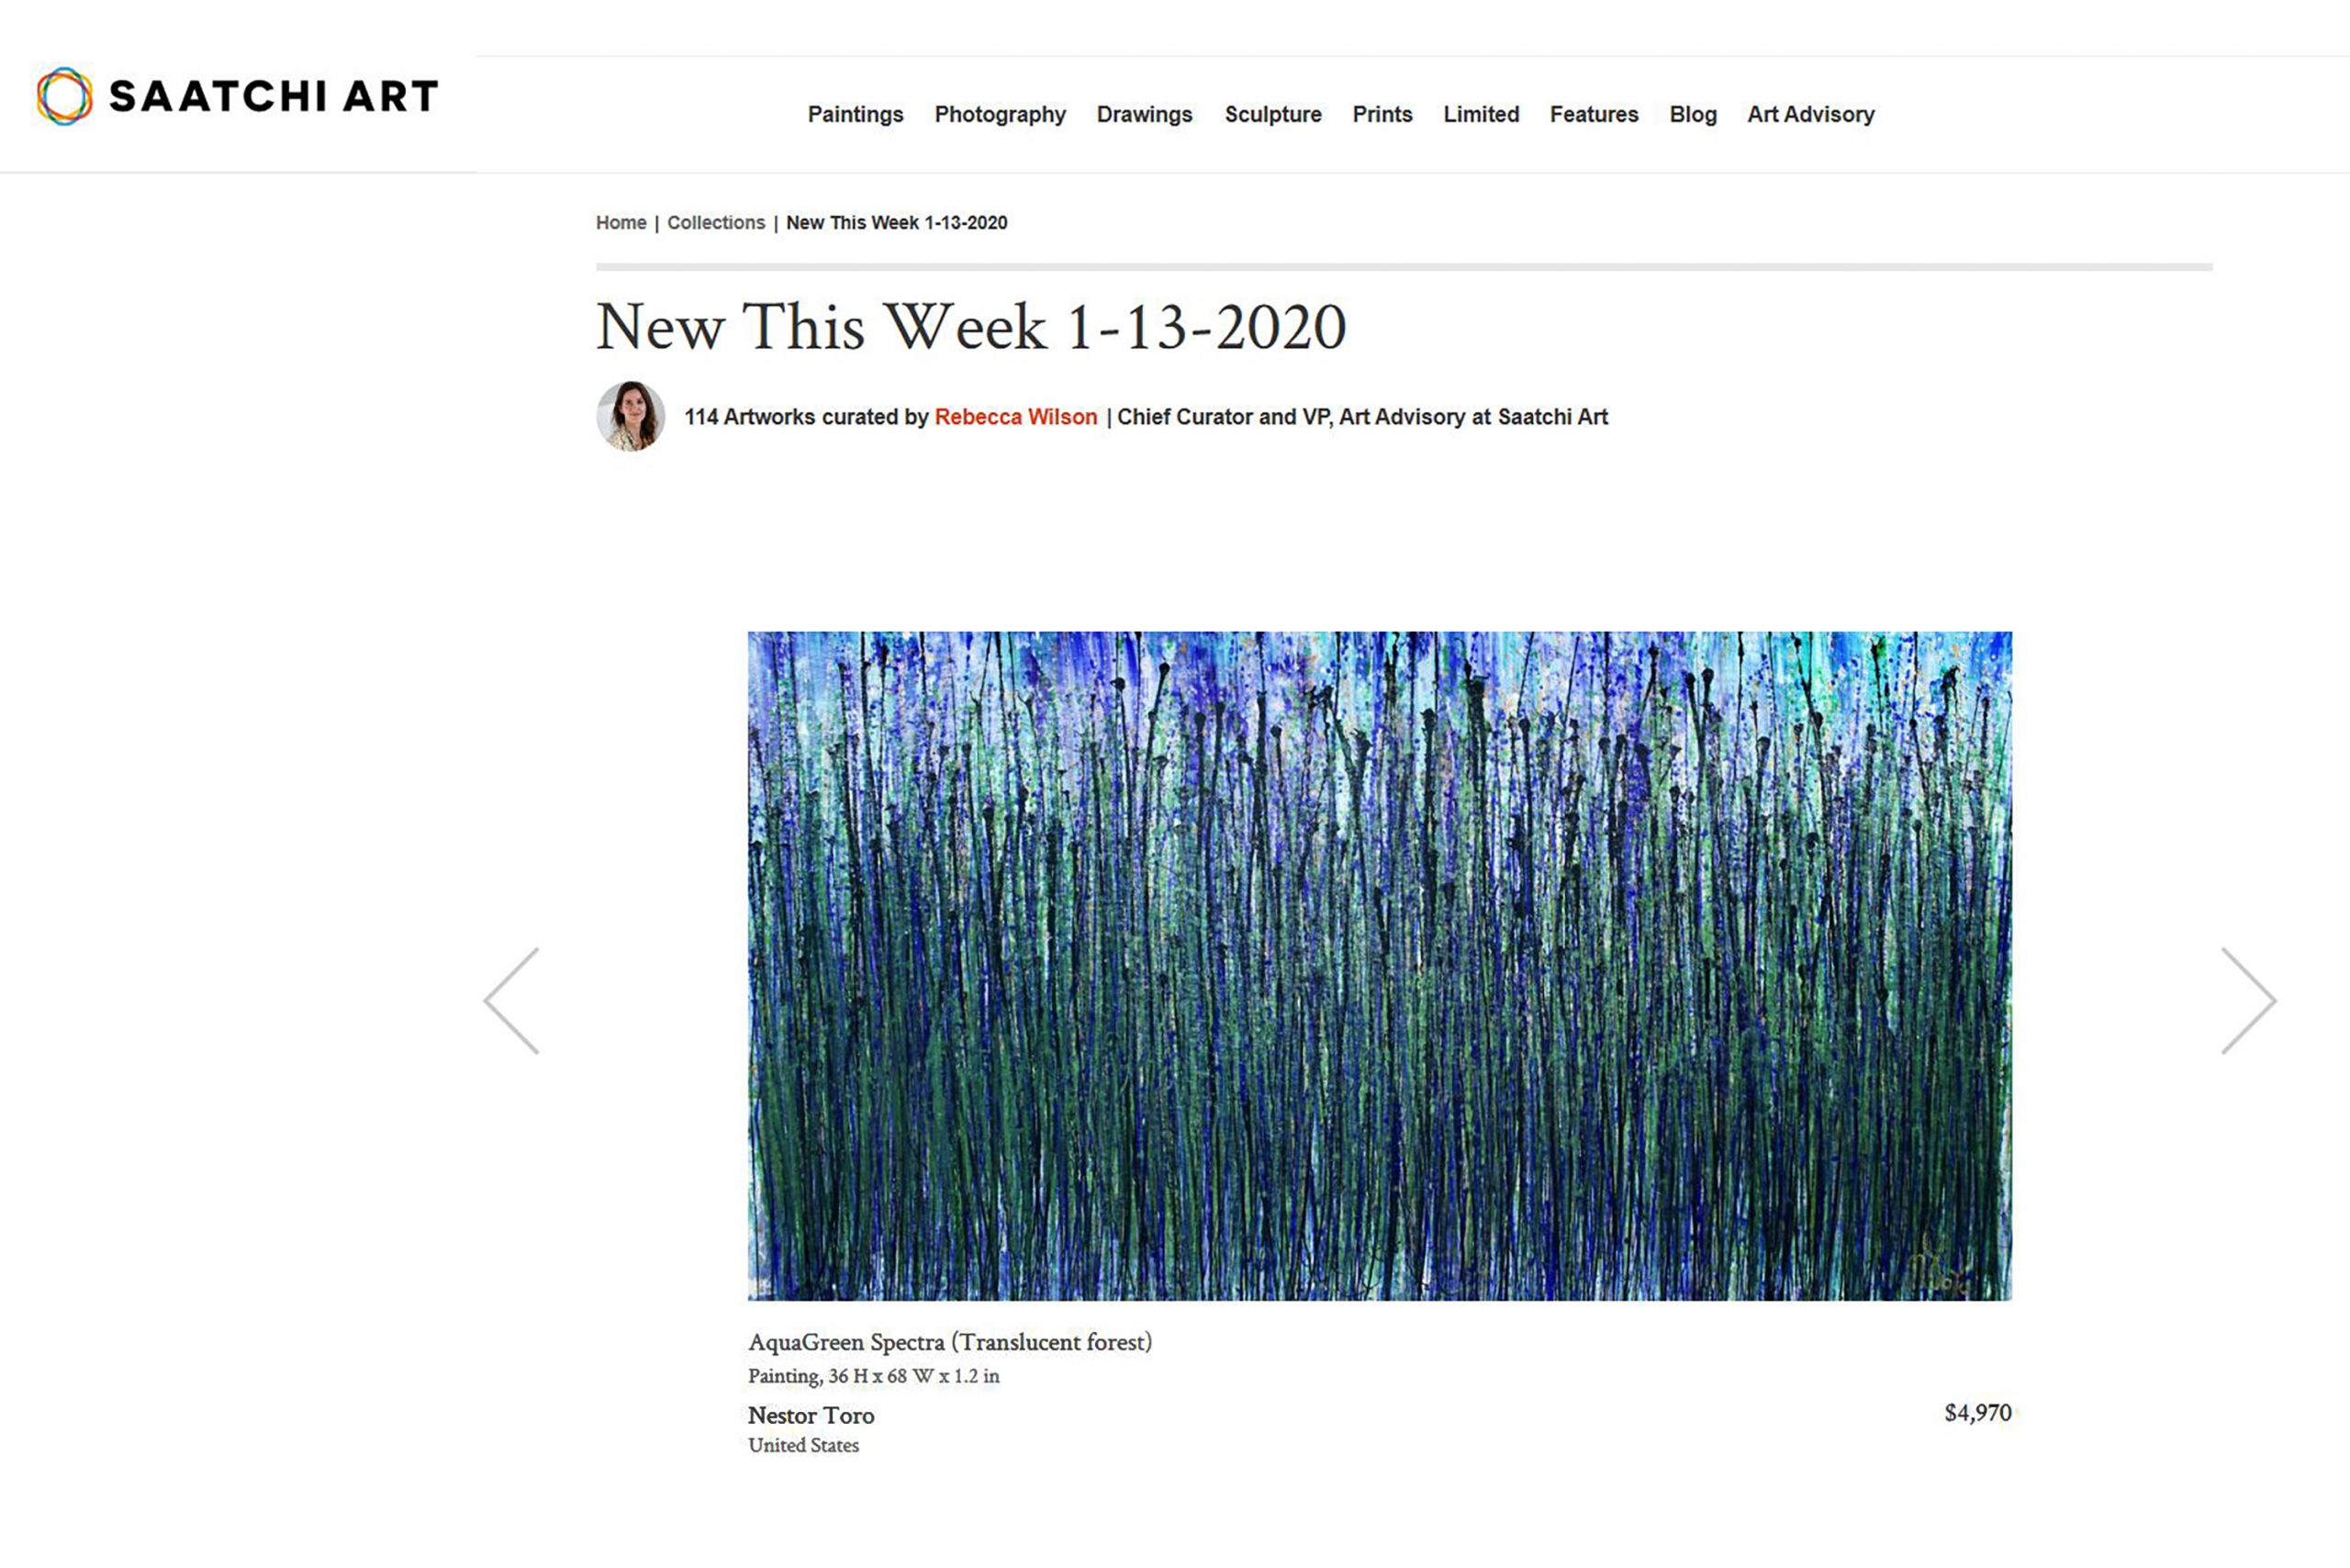 Saatchi Art's - New This Week Collection - January 13, 2020 - Nestor Toro's work - Translucent Forest